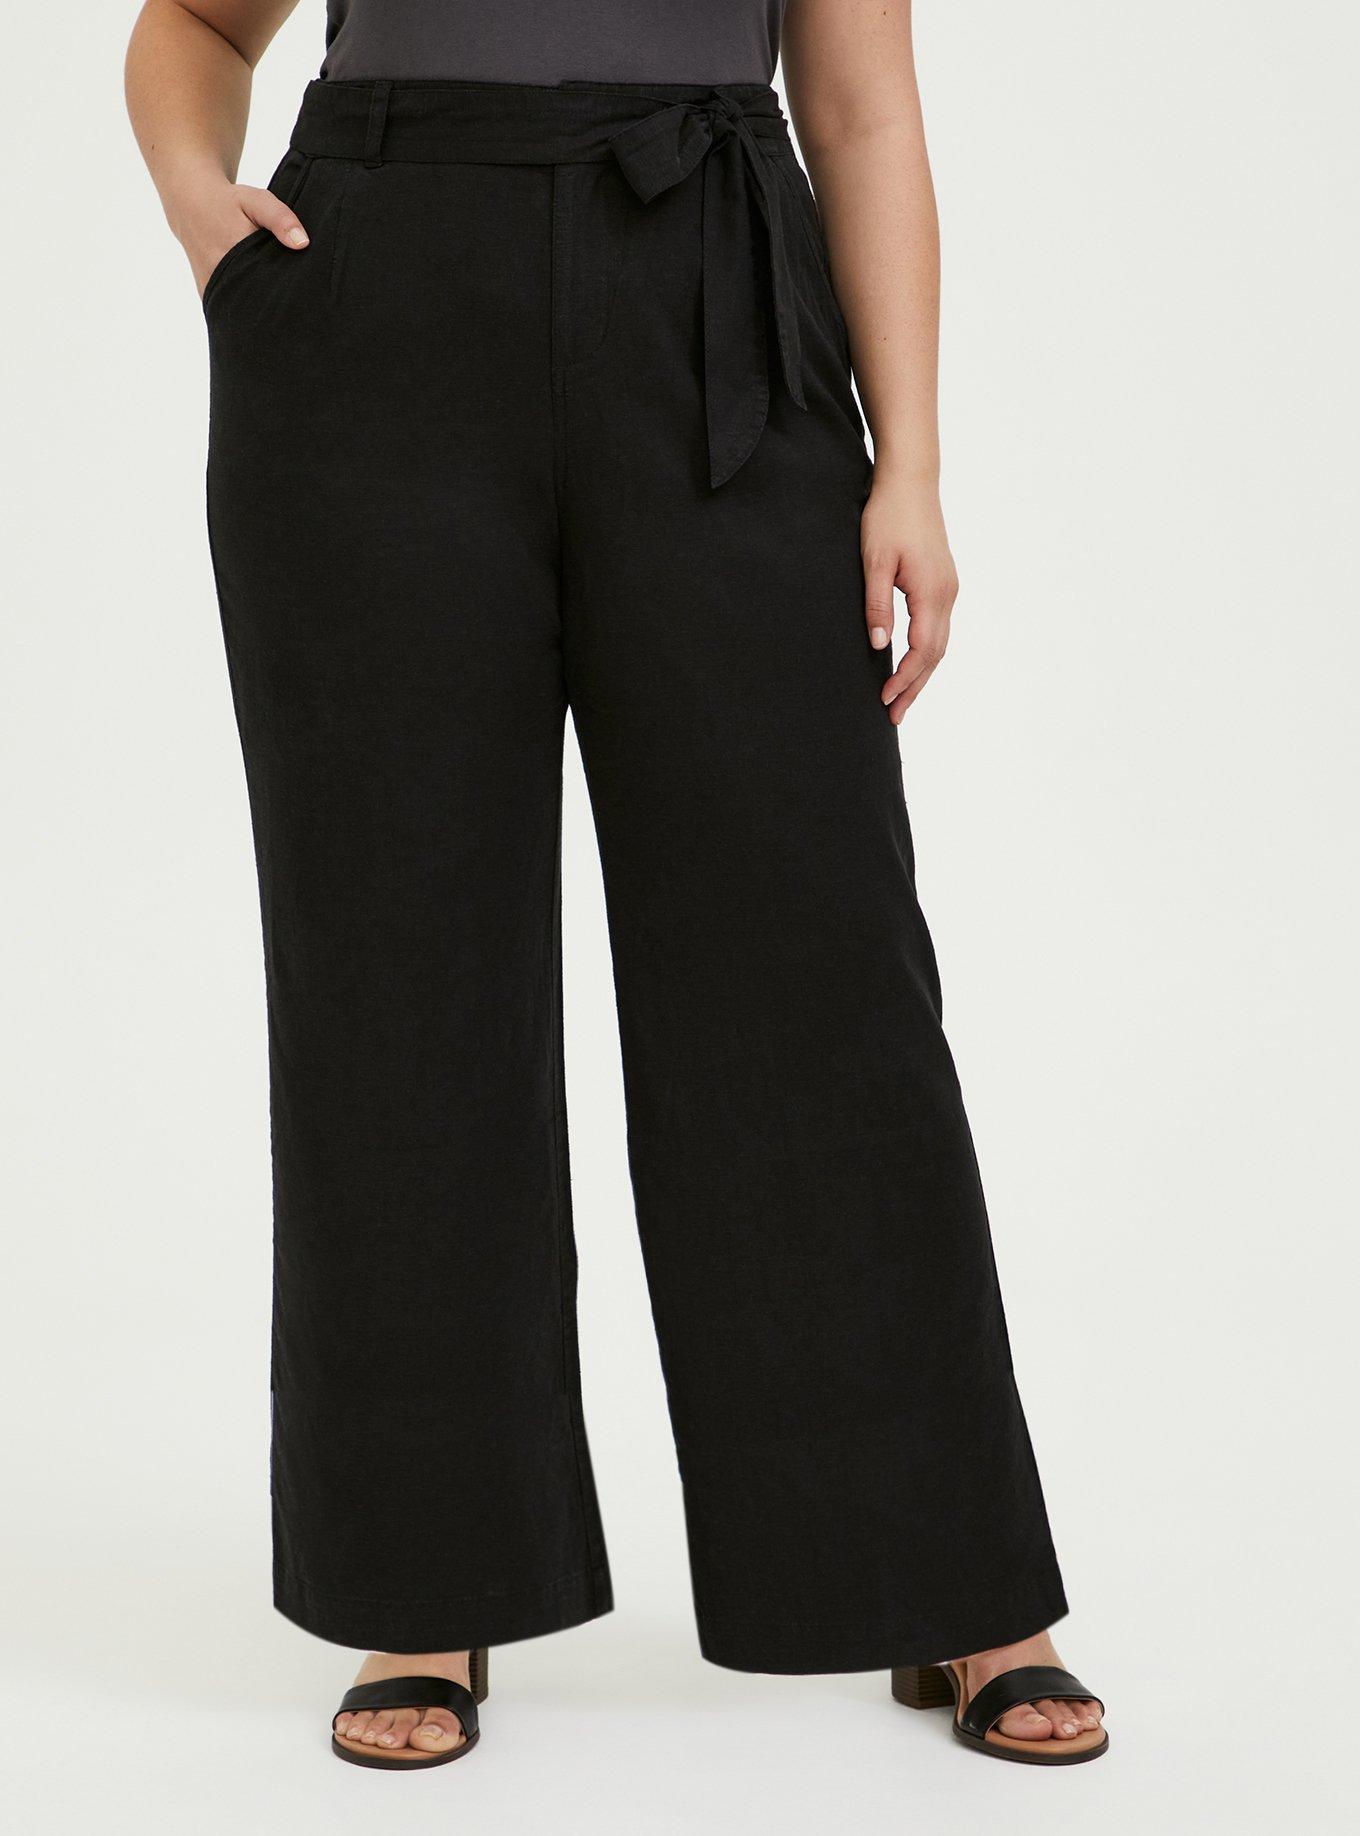 Stretch Linen Blend Pull On Pant